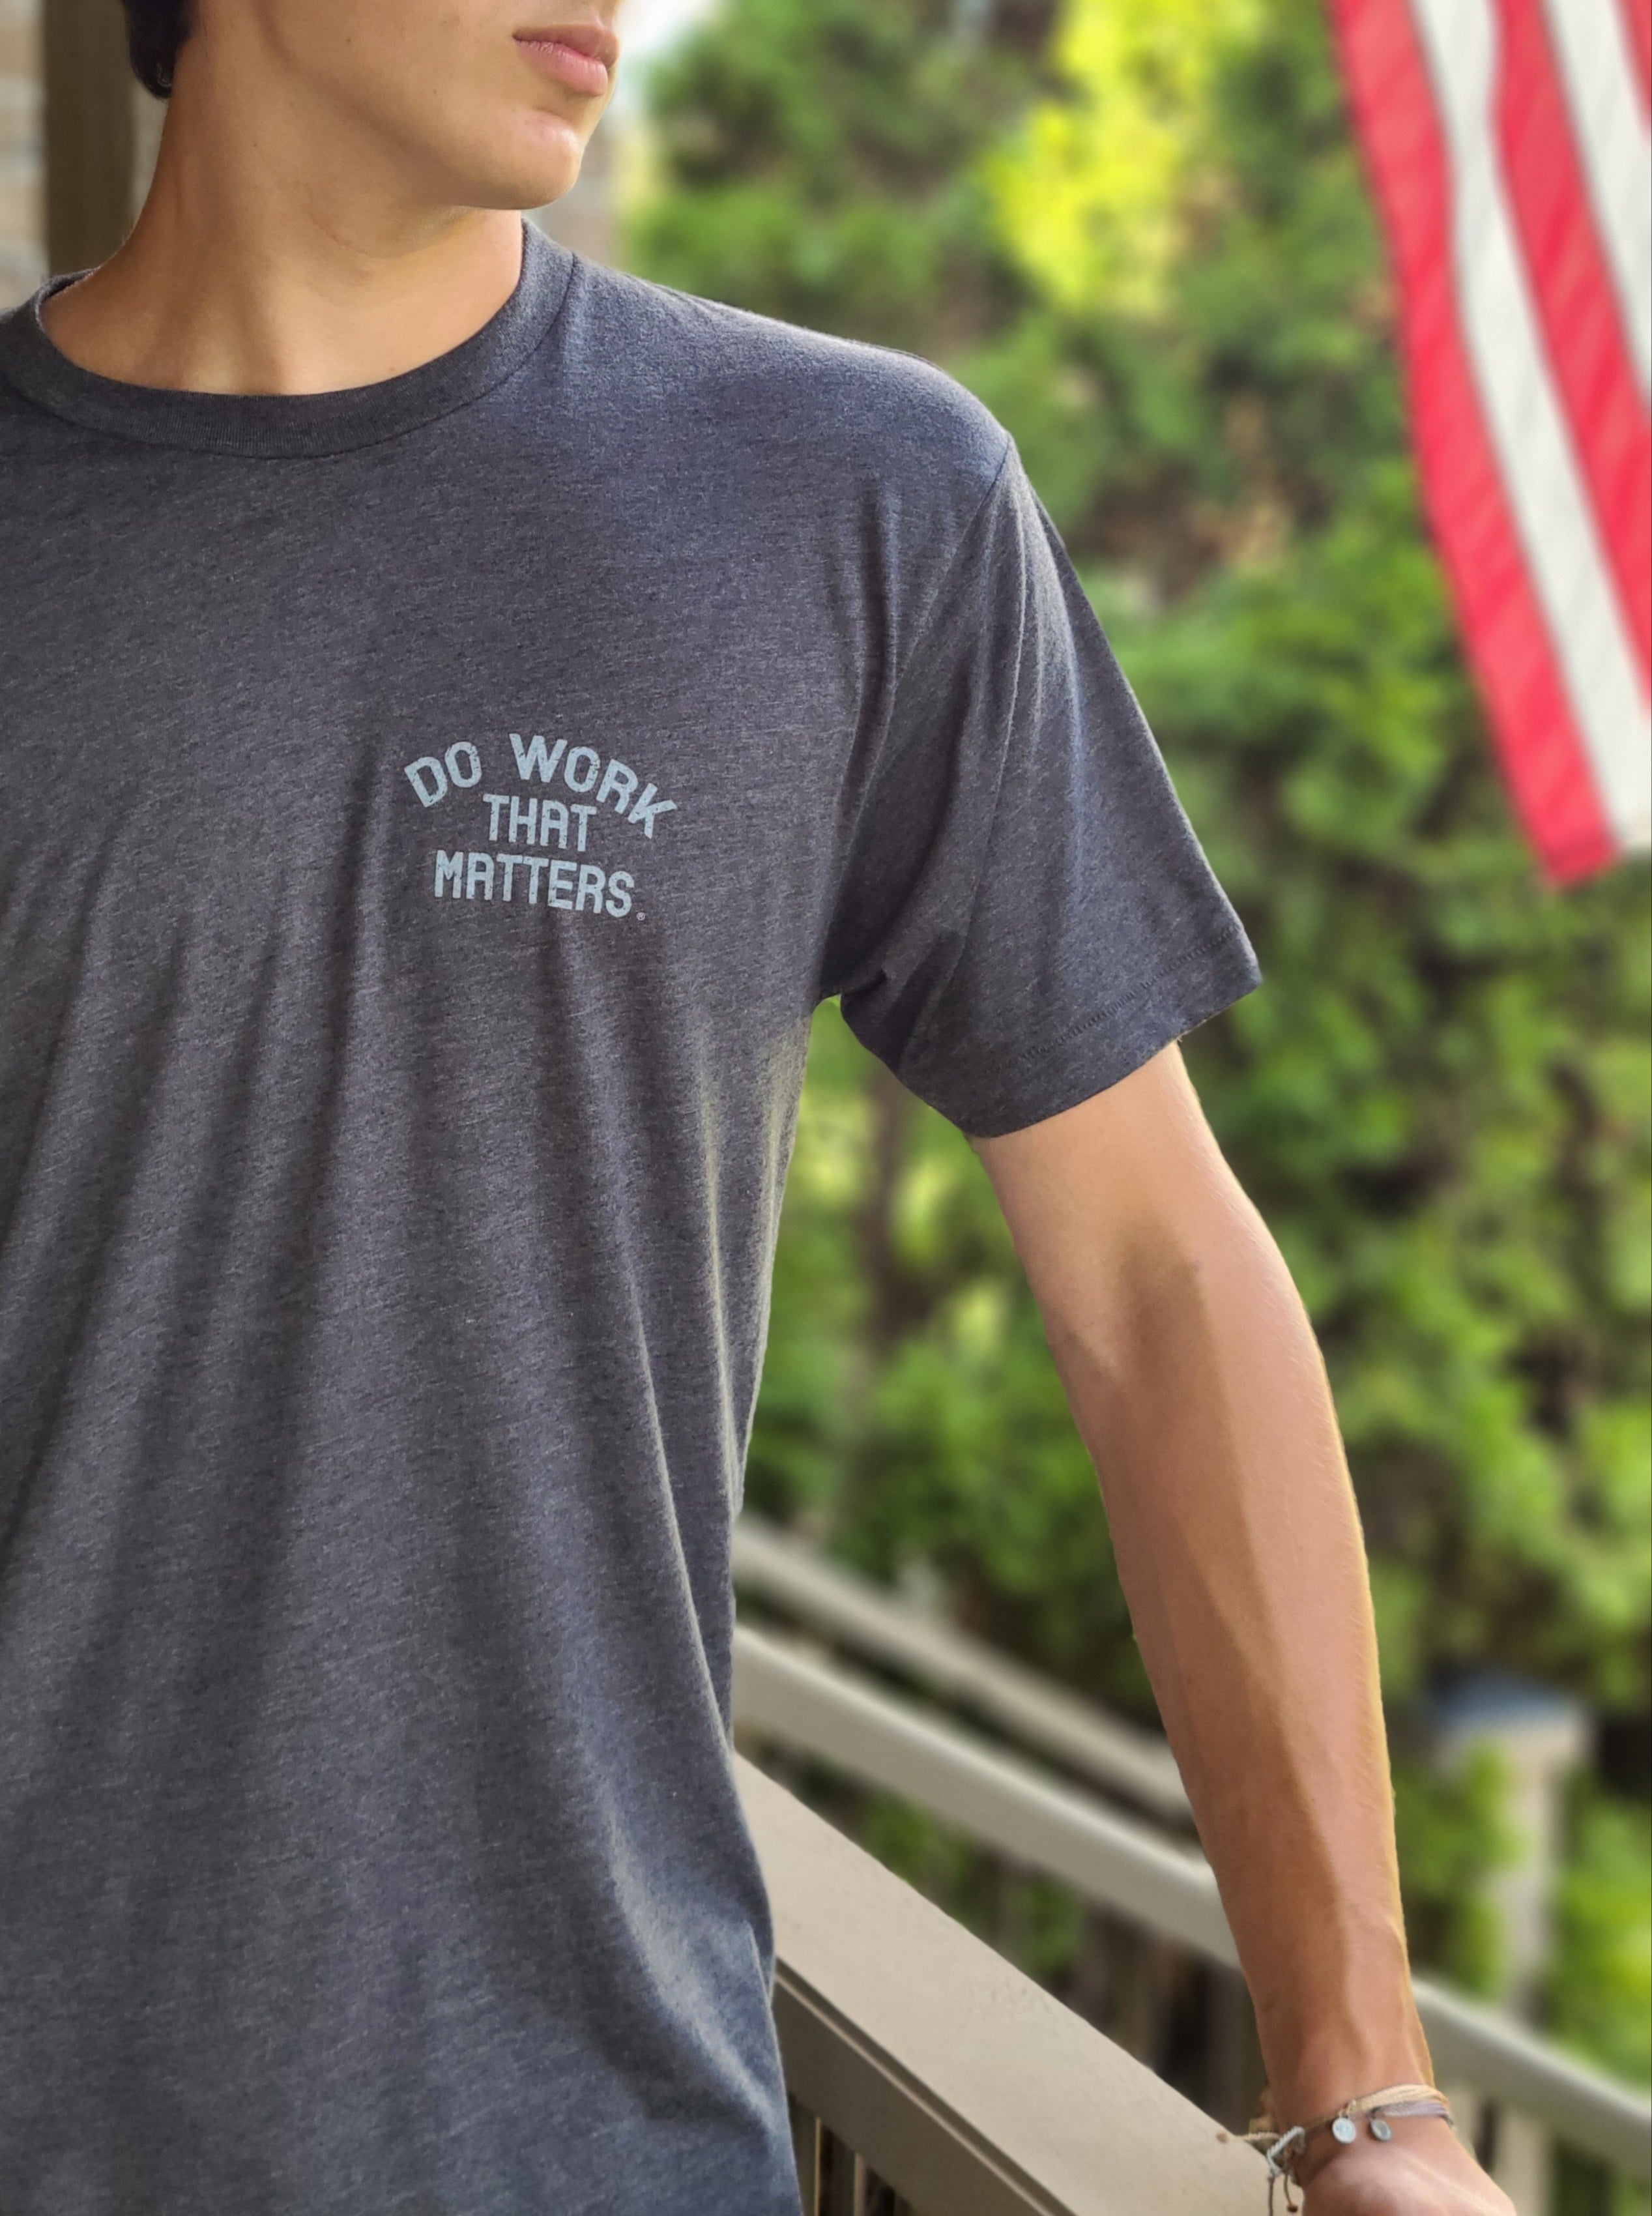 Space Force Licensed Tee - Do Work That Matters